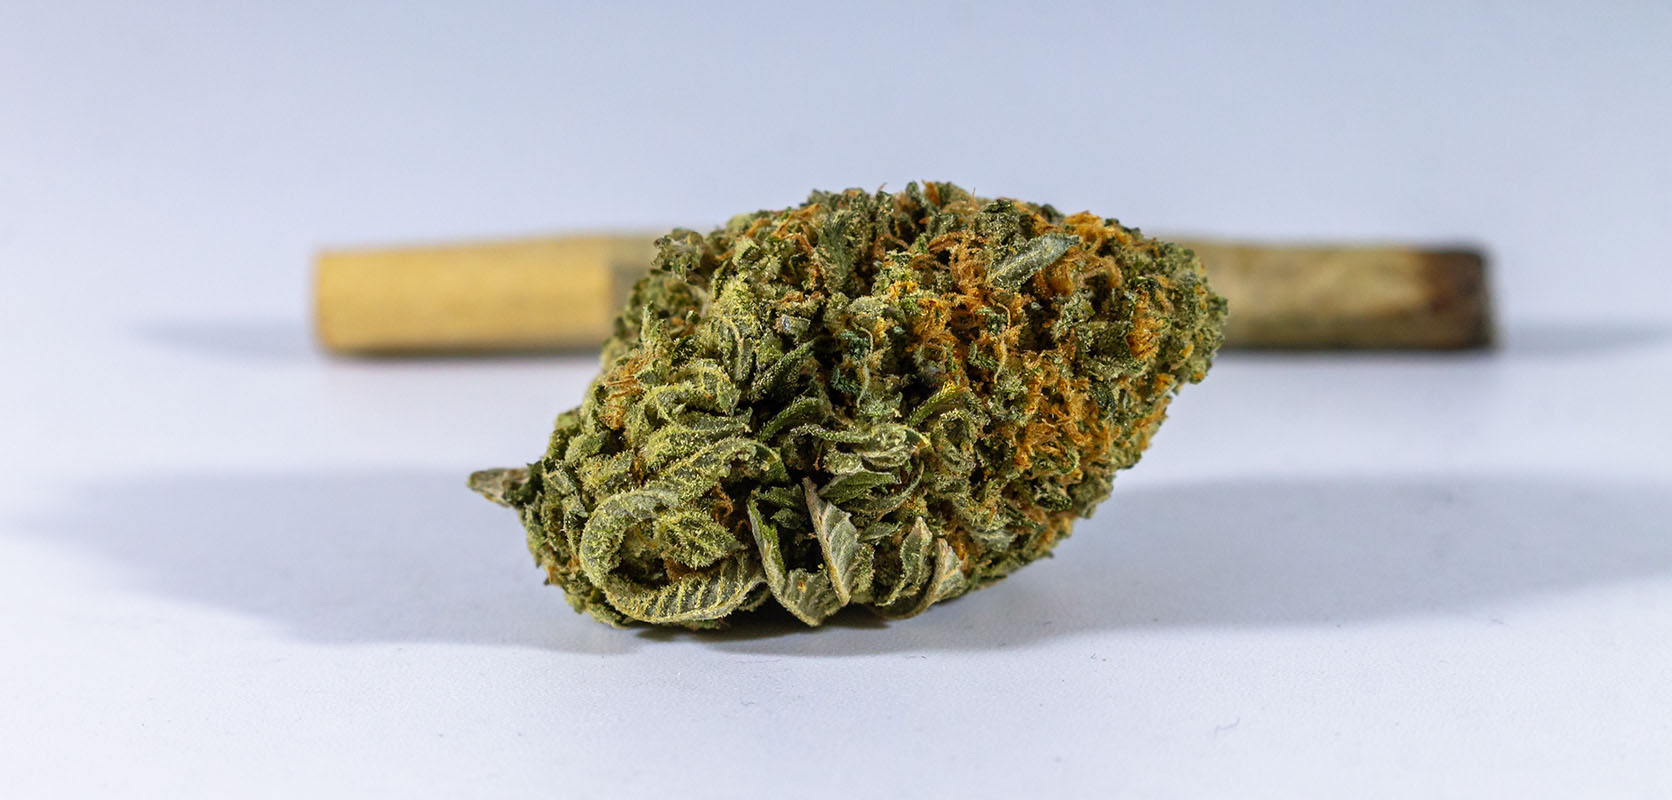 Indica strain budget bud from Low Price Bud online dispensary & mail order marijuana weed store to buy weed online in Canada. Cheap canna, value buds, gummys, and shatter online Canada.